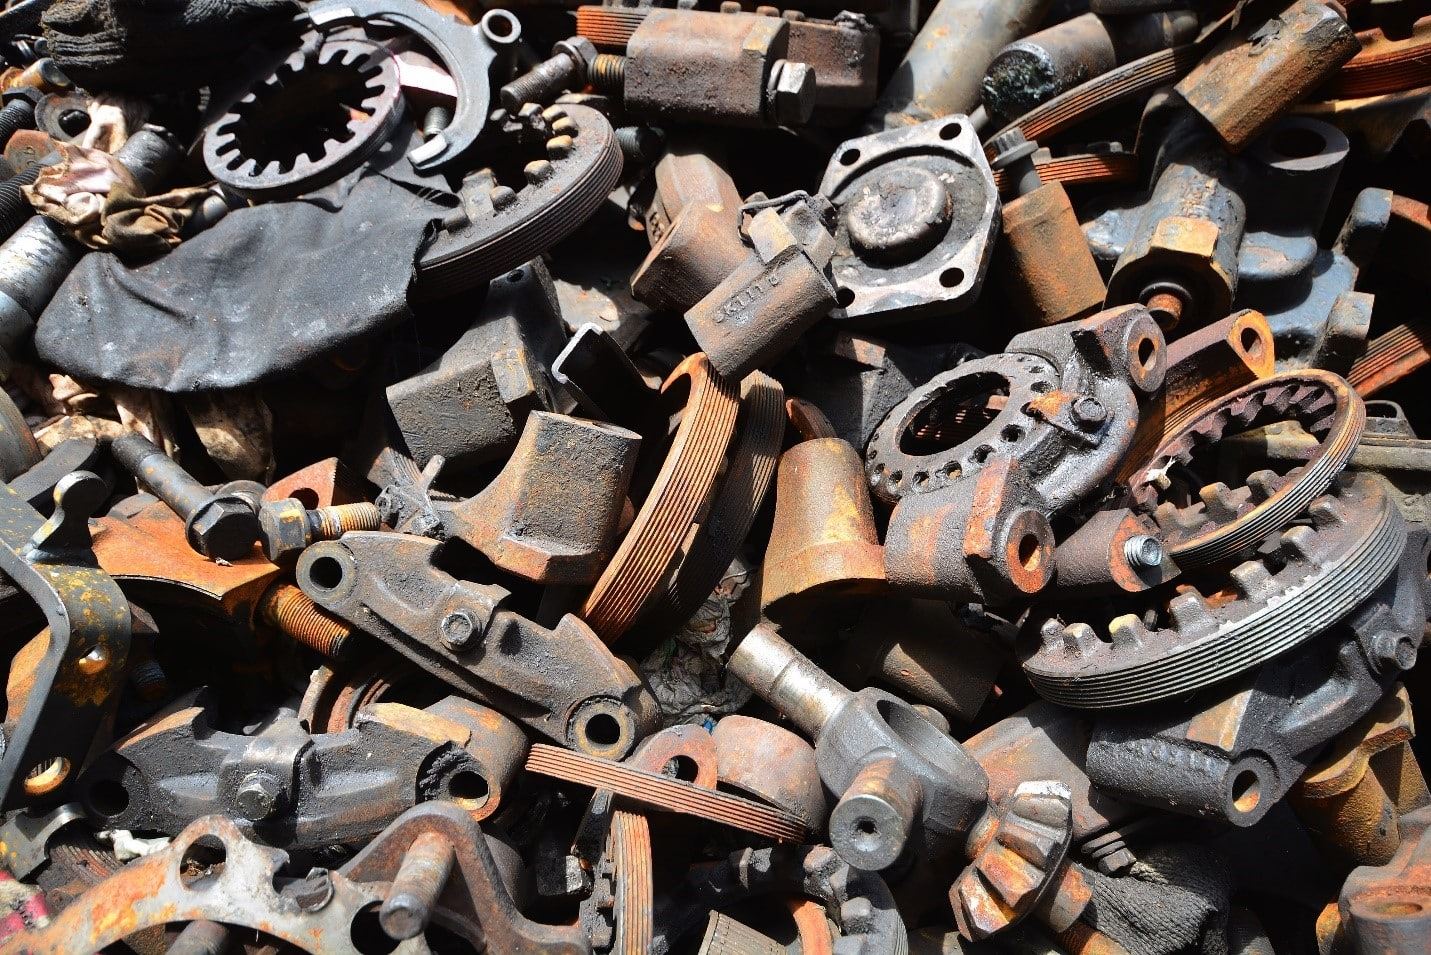 Scrap metal exports from Japan will continue to decrease in 2022